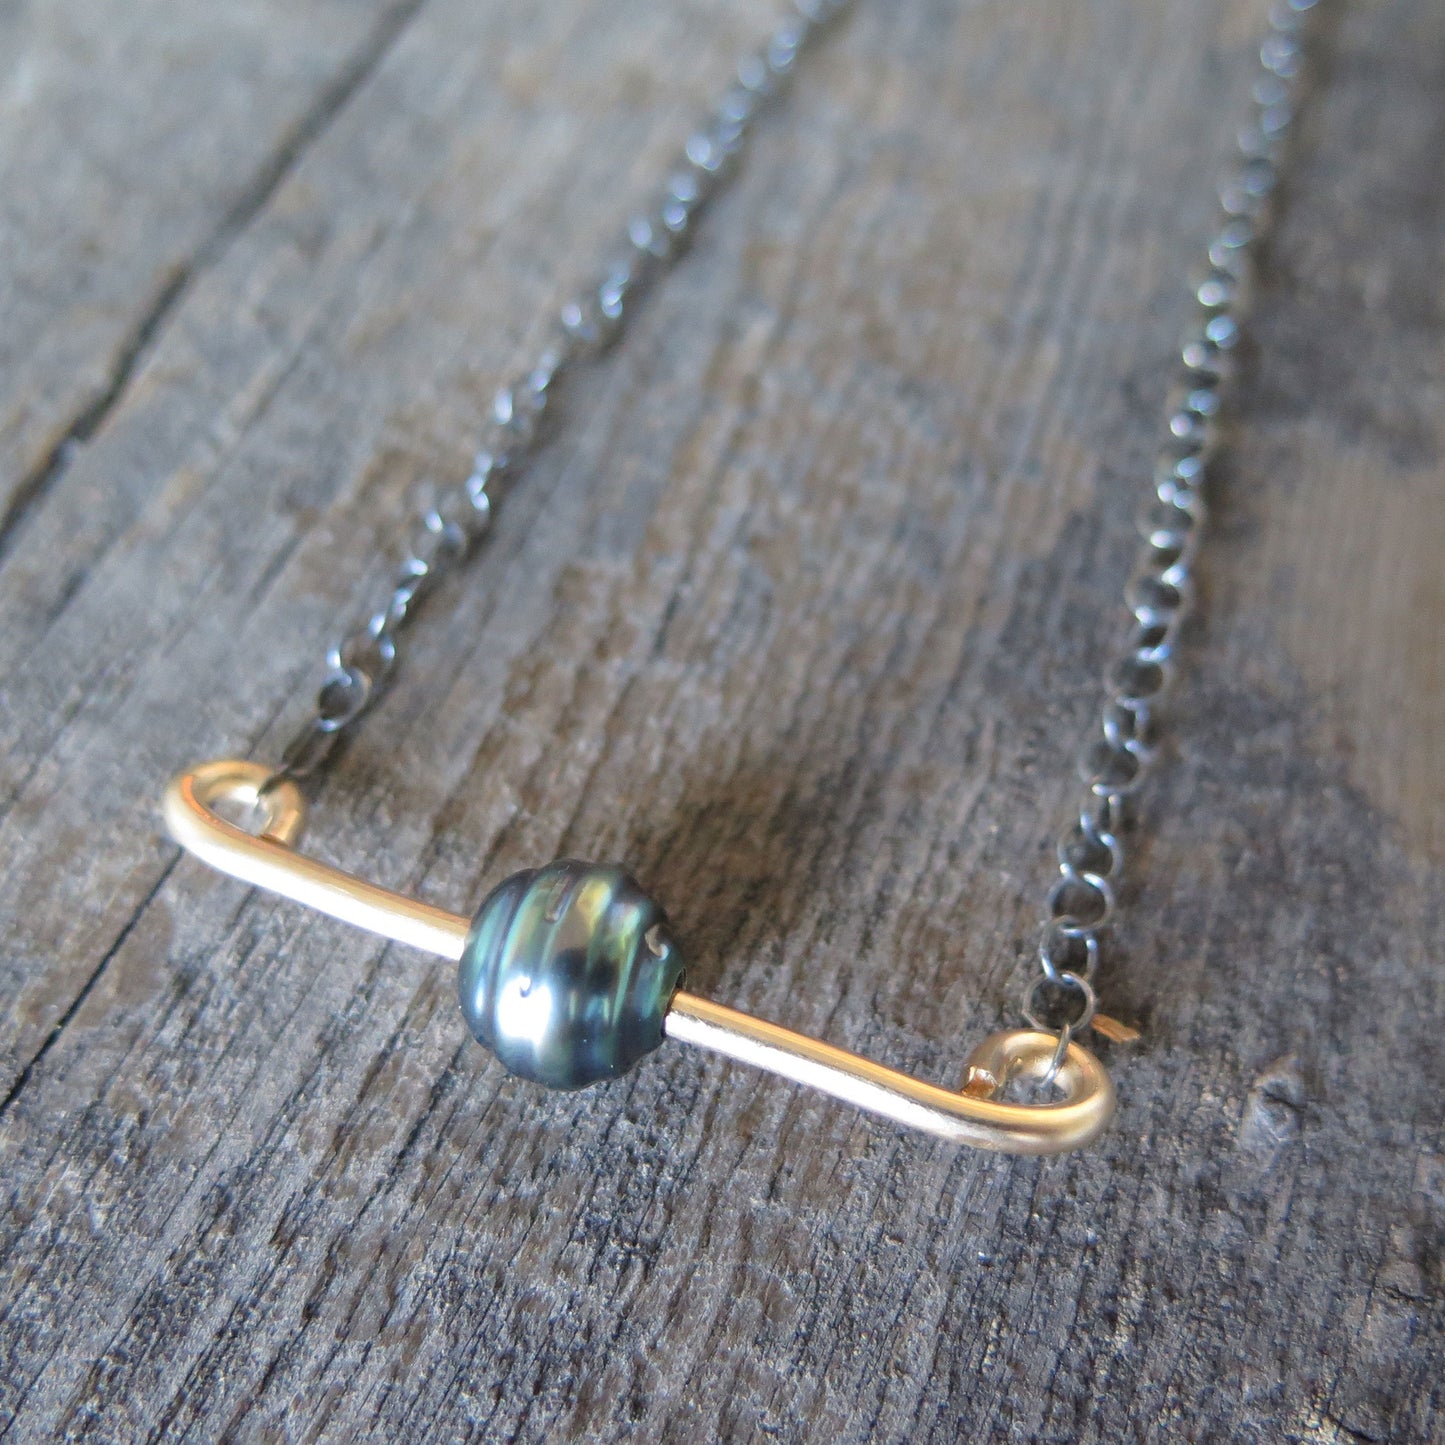 A necklace on a wooden background, there is a gold bar going through a balck pearl and suspended on a sterling silver chain that has been darkened to a grey.